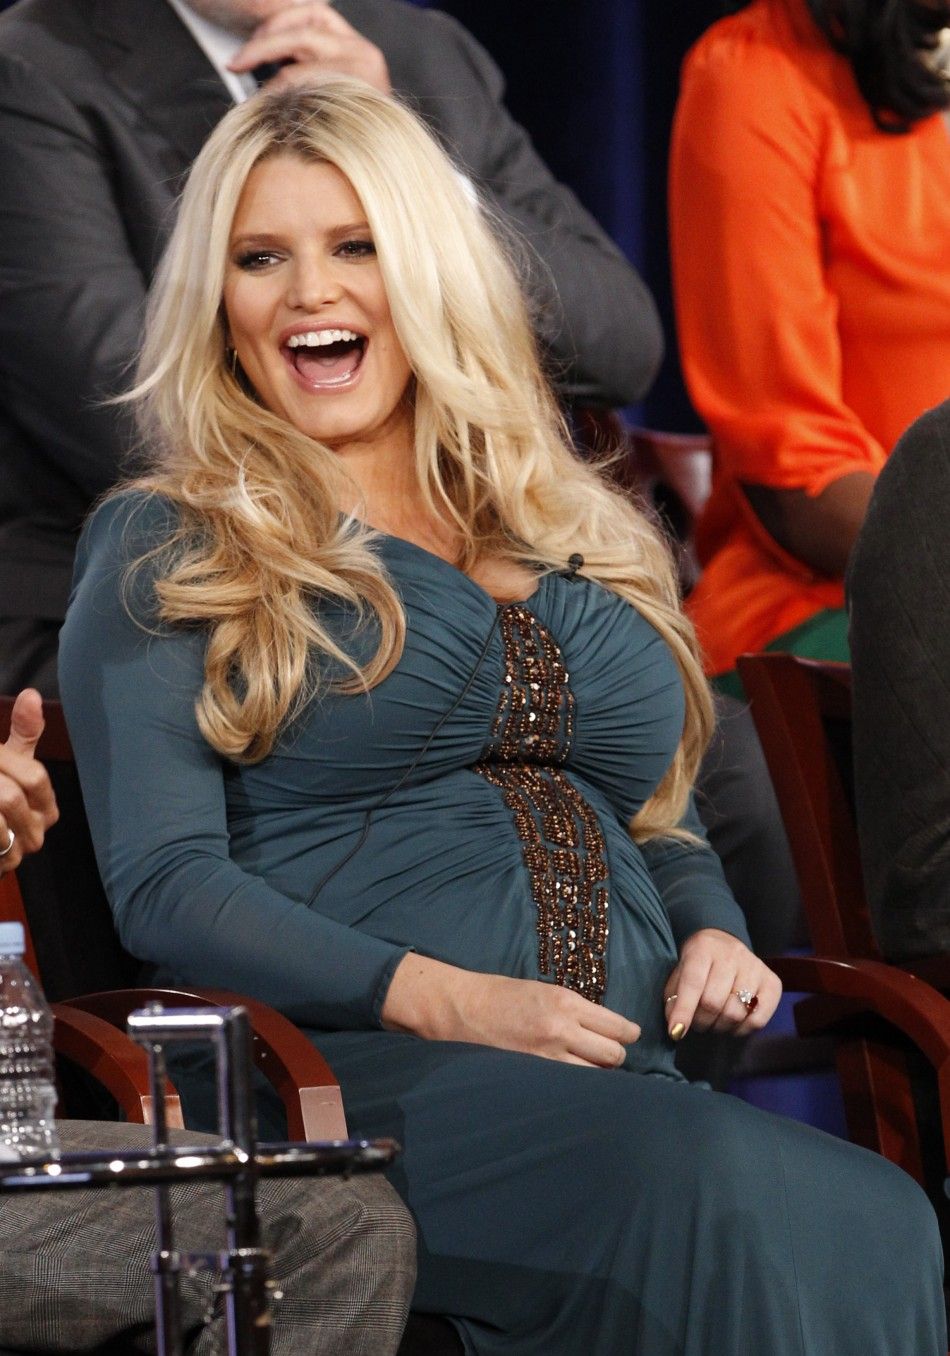 Jessica Simpson To Launch Maternity Line: 'You Want To Show Off Your Bump